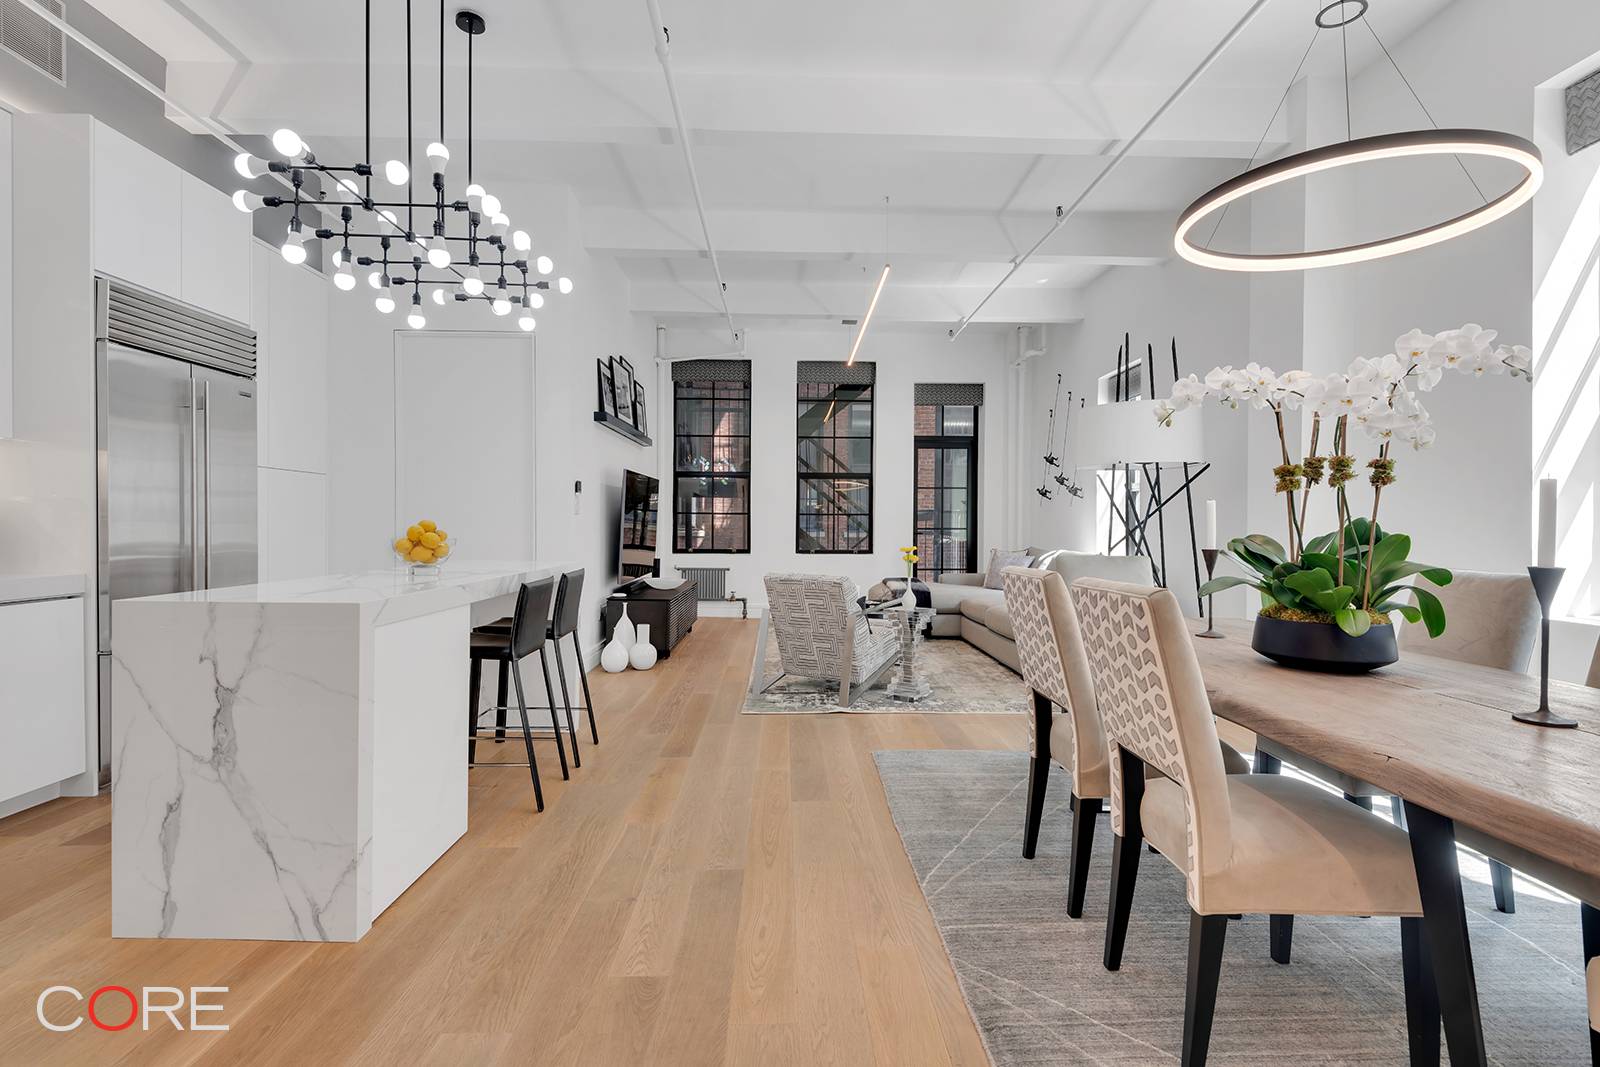 Rare opportunity a sprawling, beautifully renovated two bedroom, two bathroom loft with top of the line finishes in the heart of Chelsea NoMad.